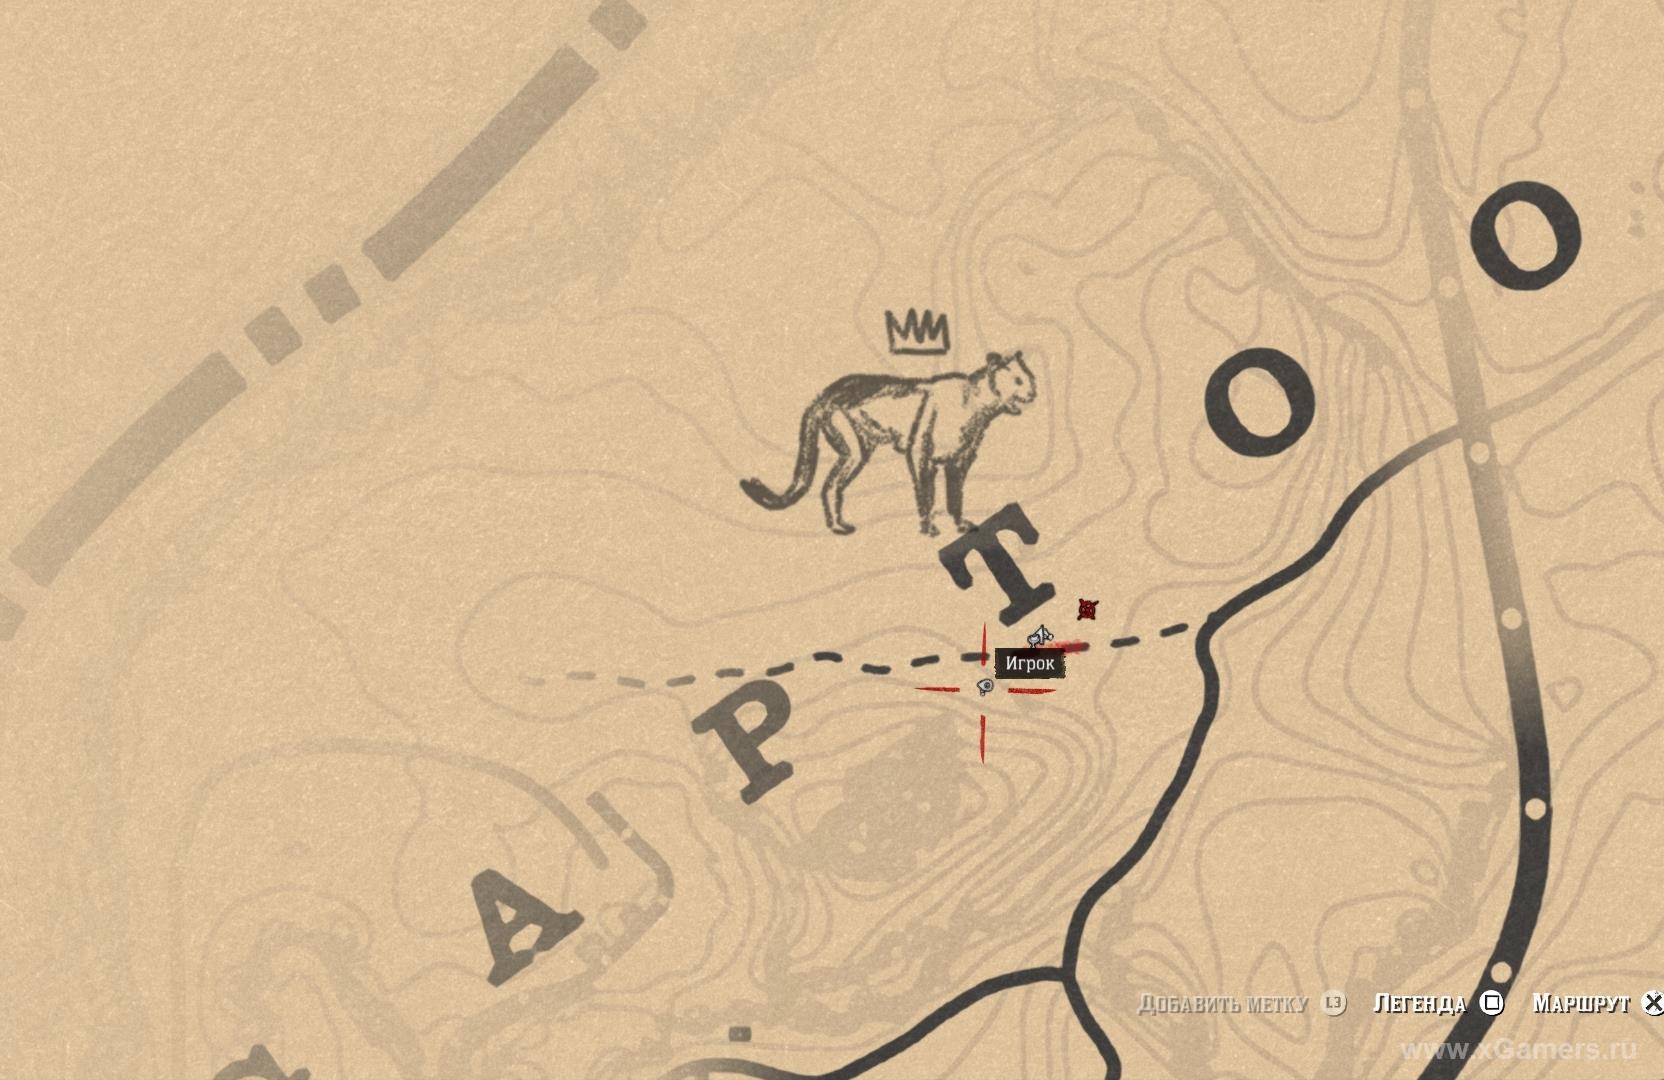 Location of the legendary Puma on the map